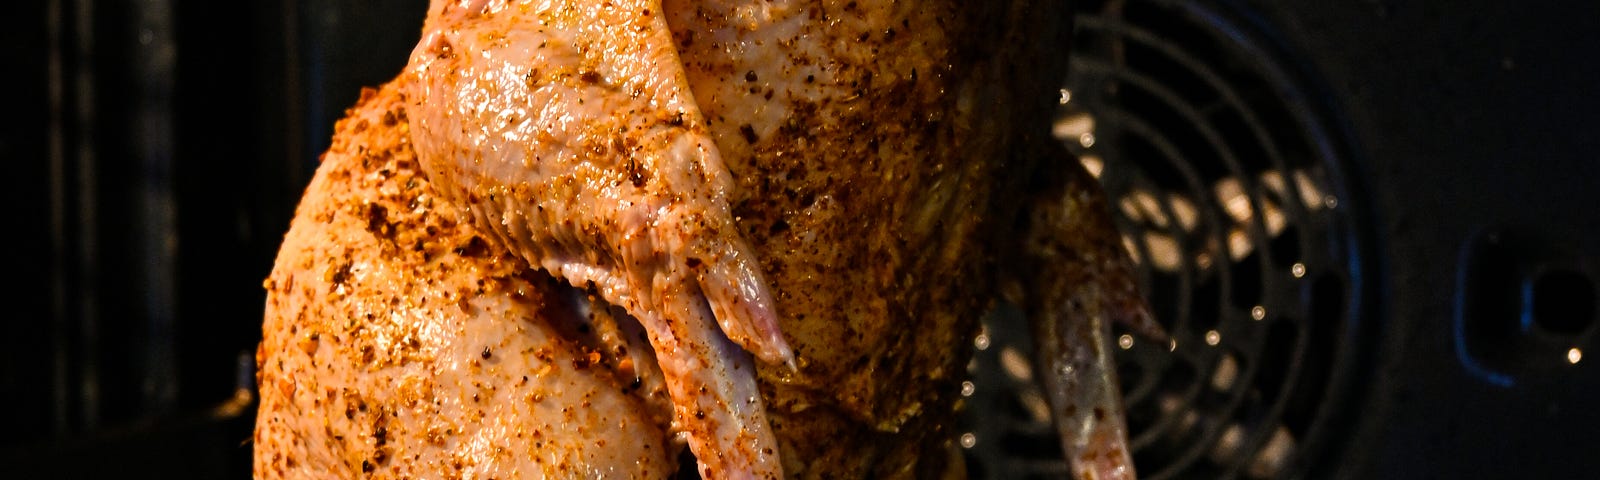 A golden juicy chicken sits upright in an oven, roasting.